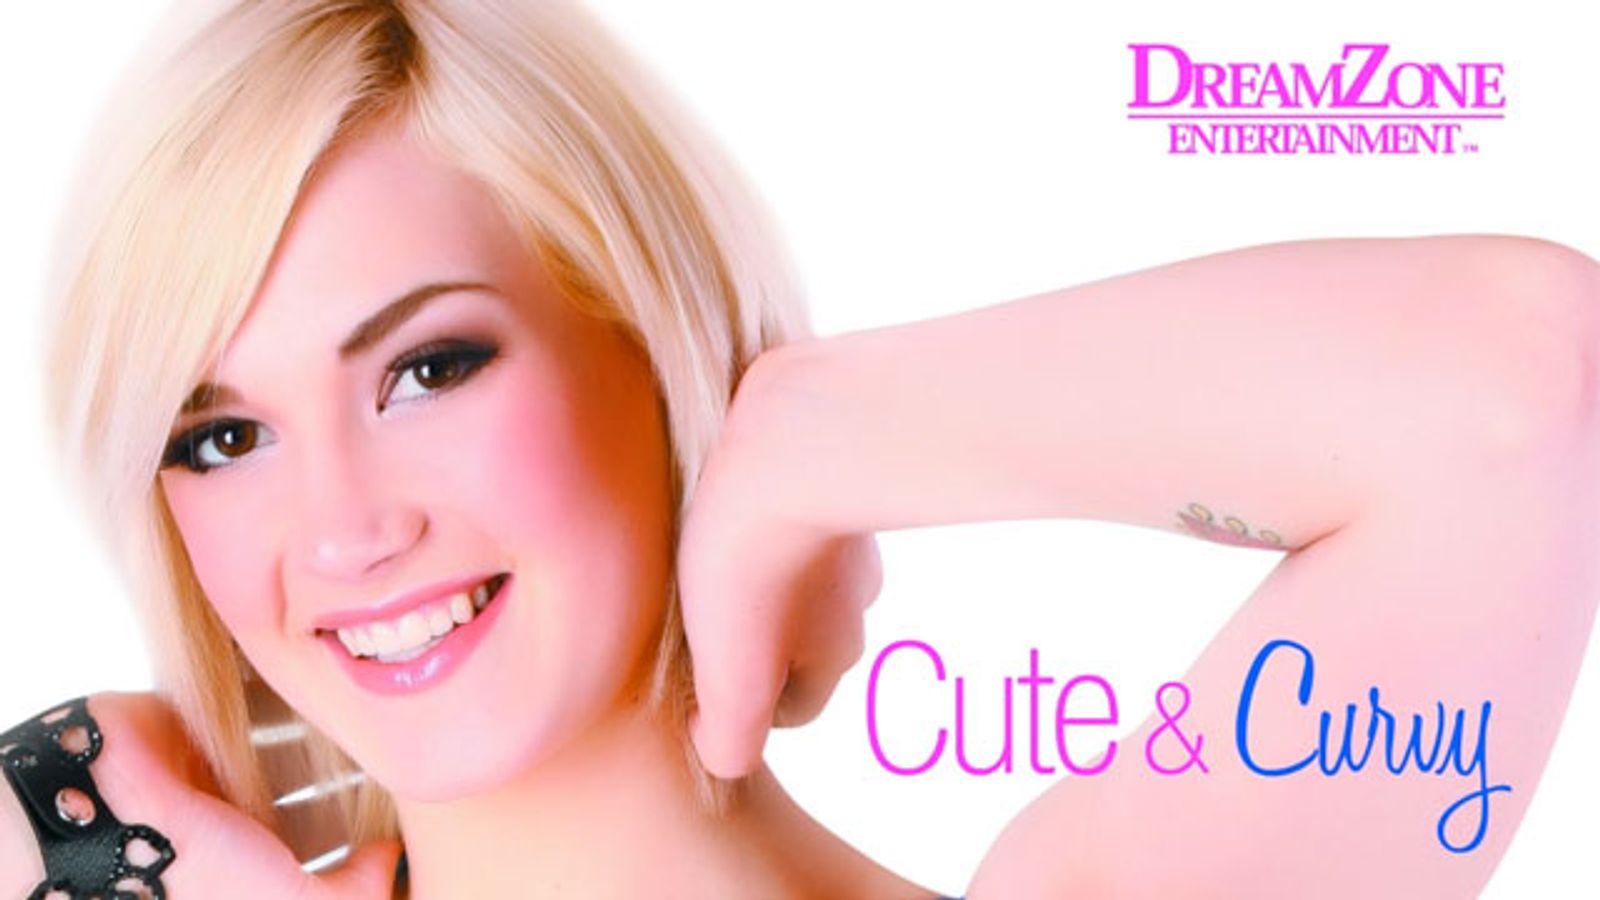 DreamZone Entertainment Releases Galleries for ‘Cute & Curvy’